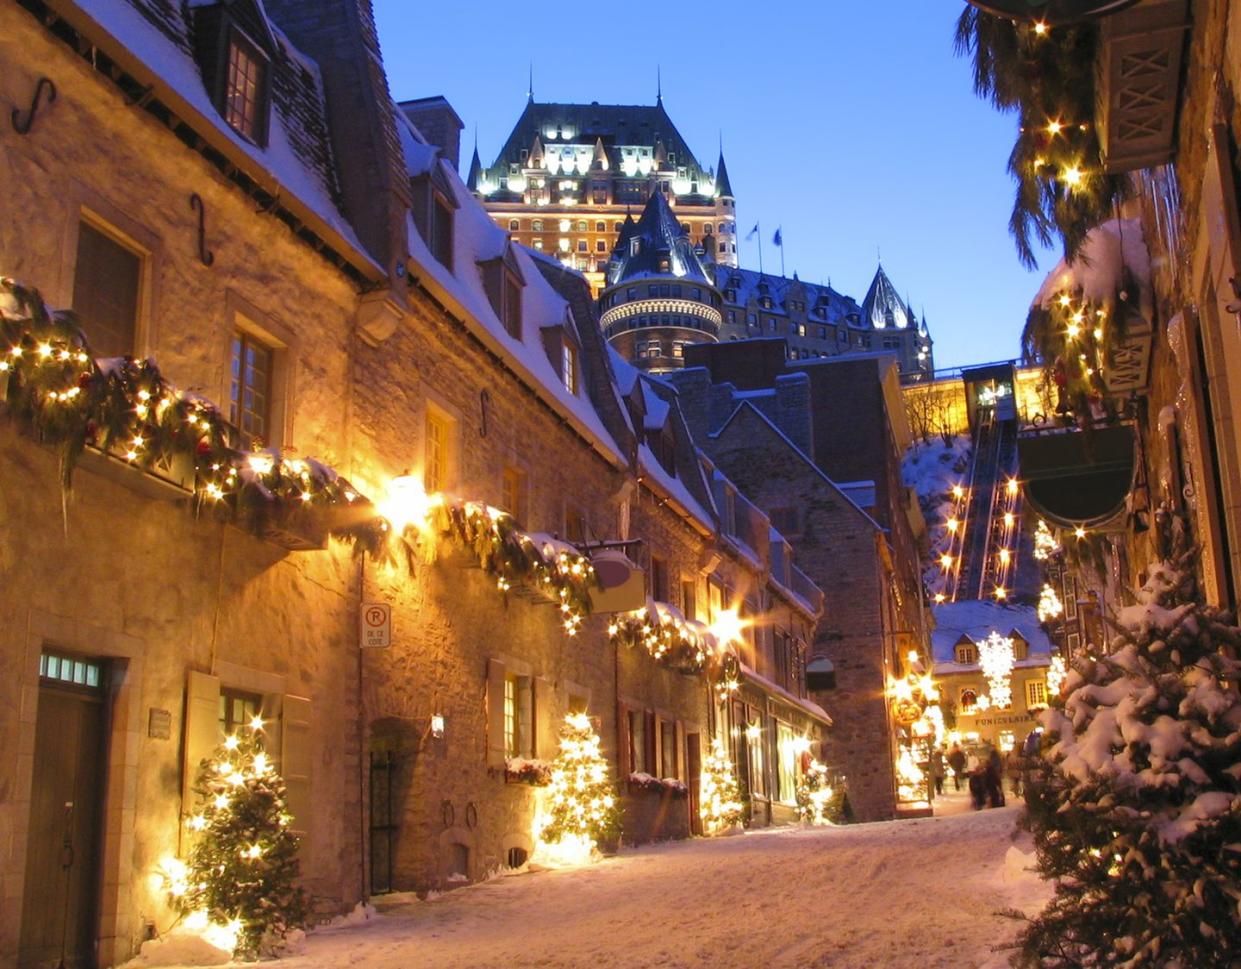 chateau frontenac at night in winter, quebec city